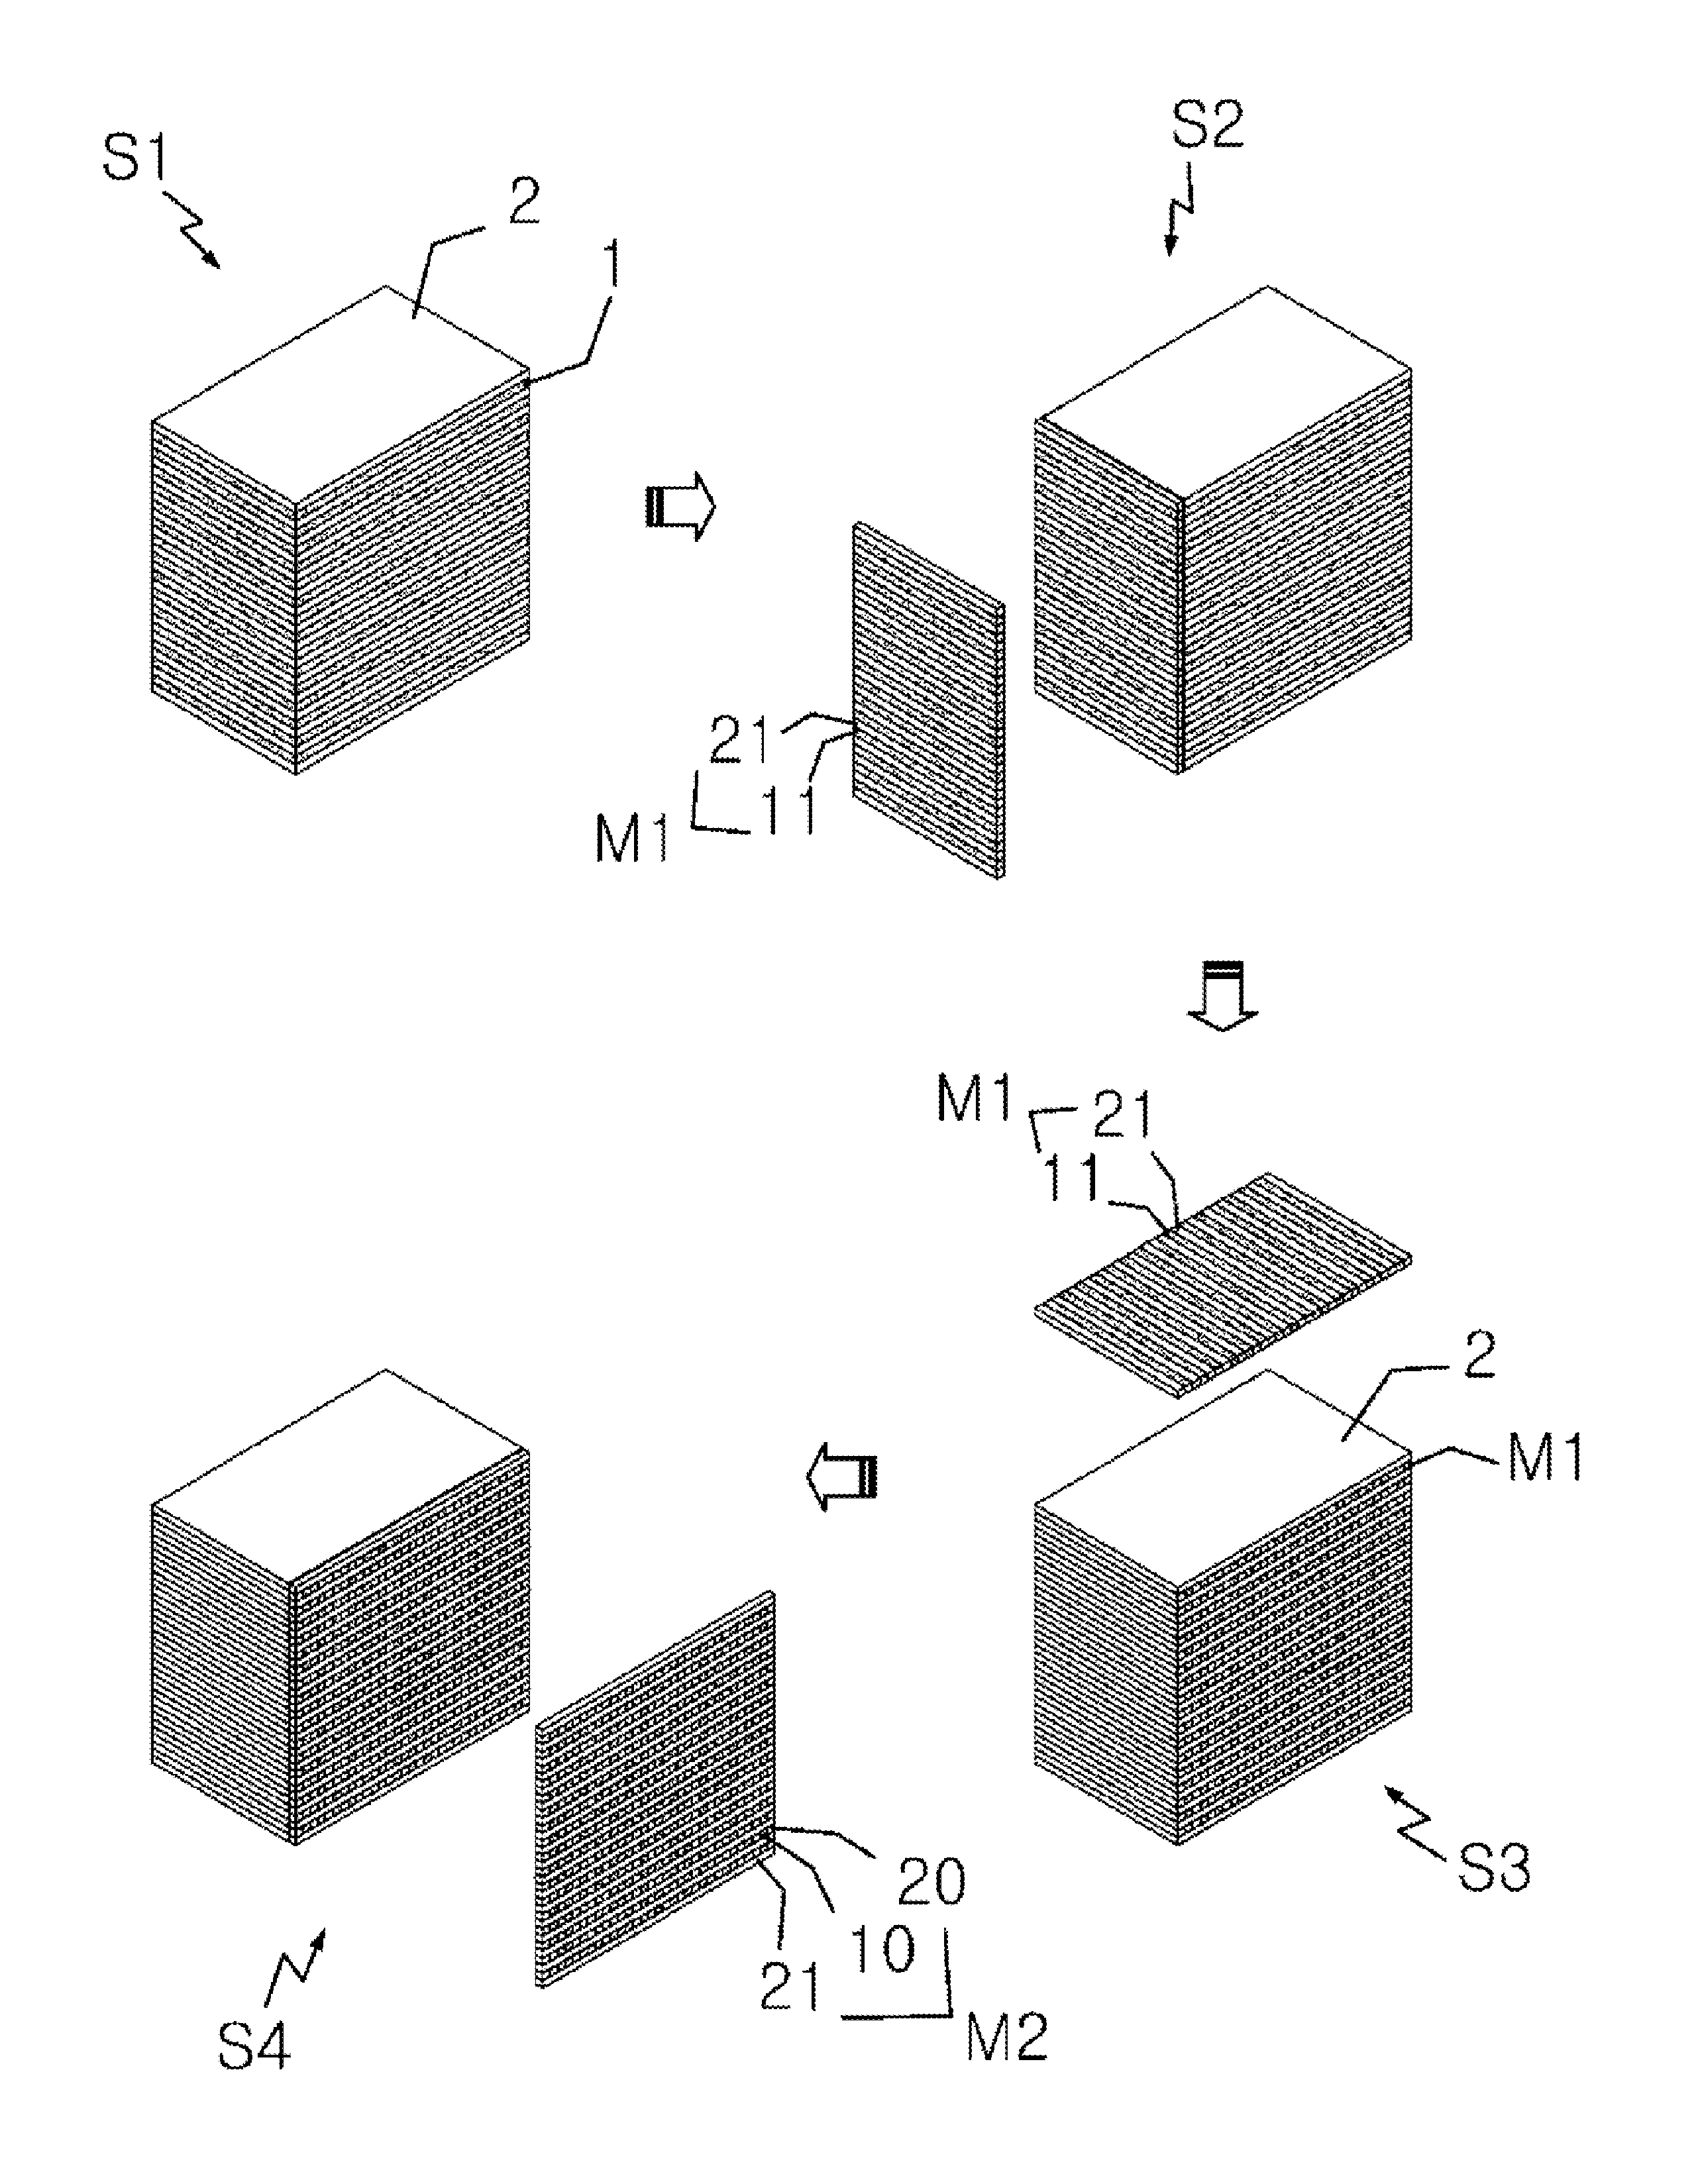 Method for manufacturing a contact for testing a semiconductor device